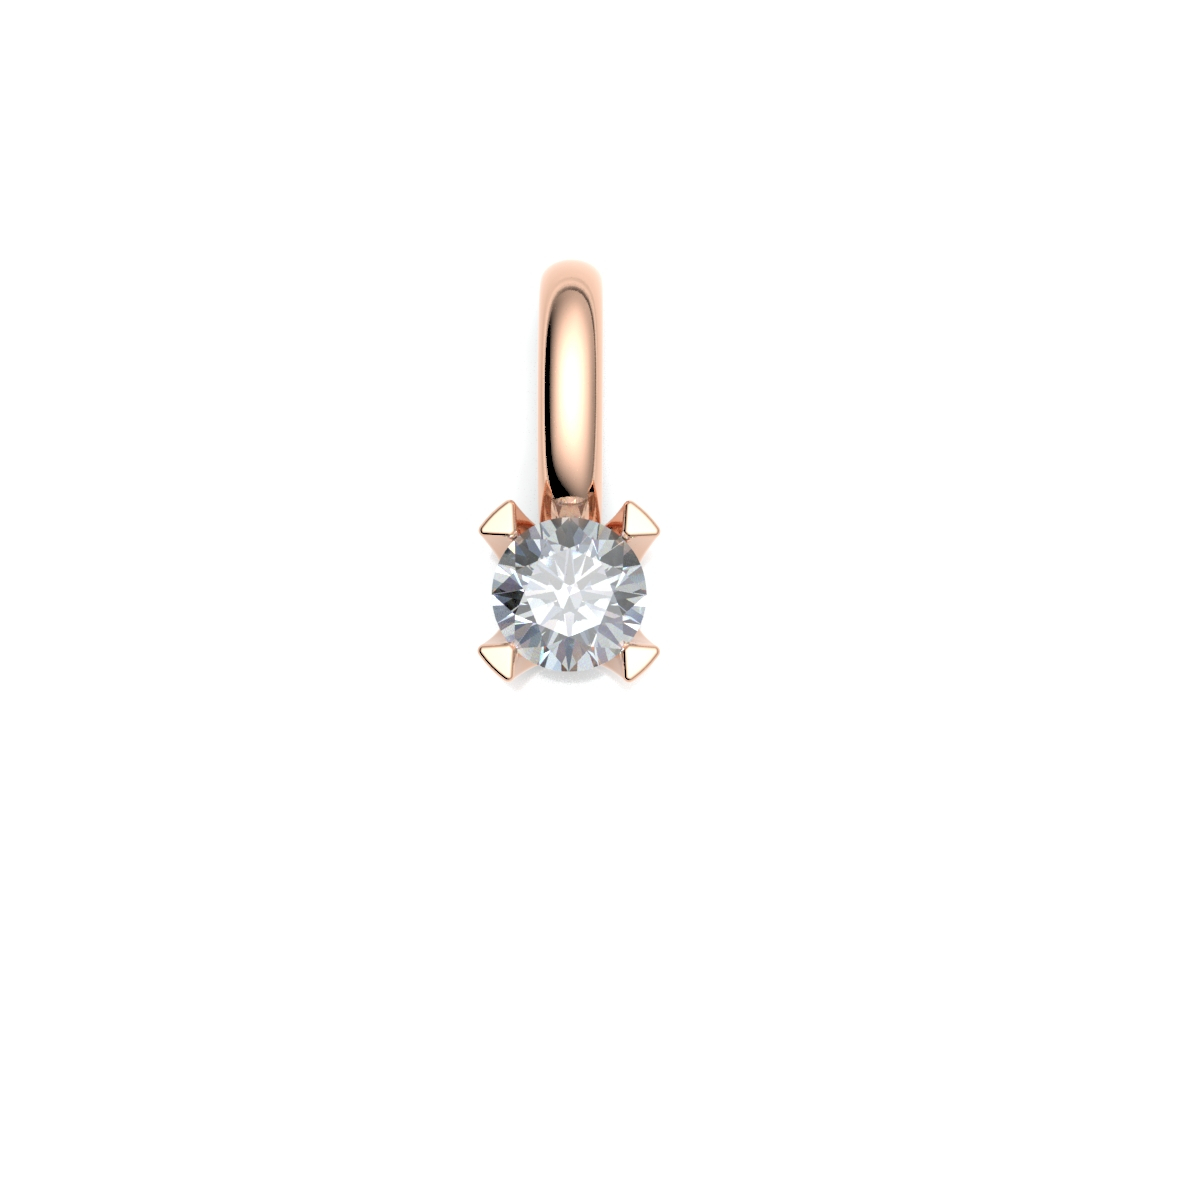 212798-4034-001 | Anhänger Bergneustadt 212798 375 Rotgold Brillant 0,150 ct H-SI ∅ 3.4mm100% Made in Germany  